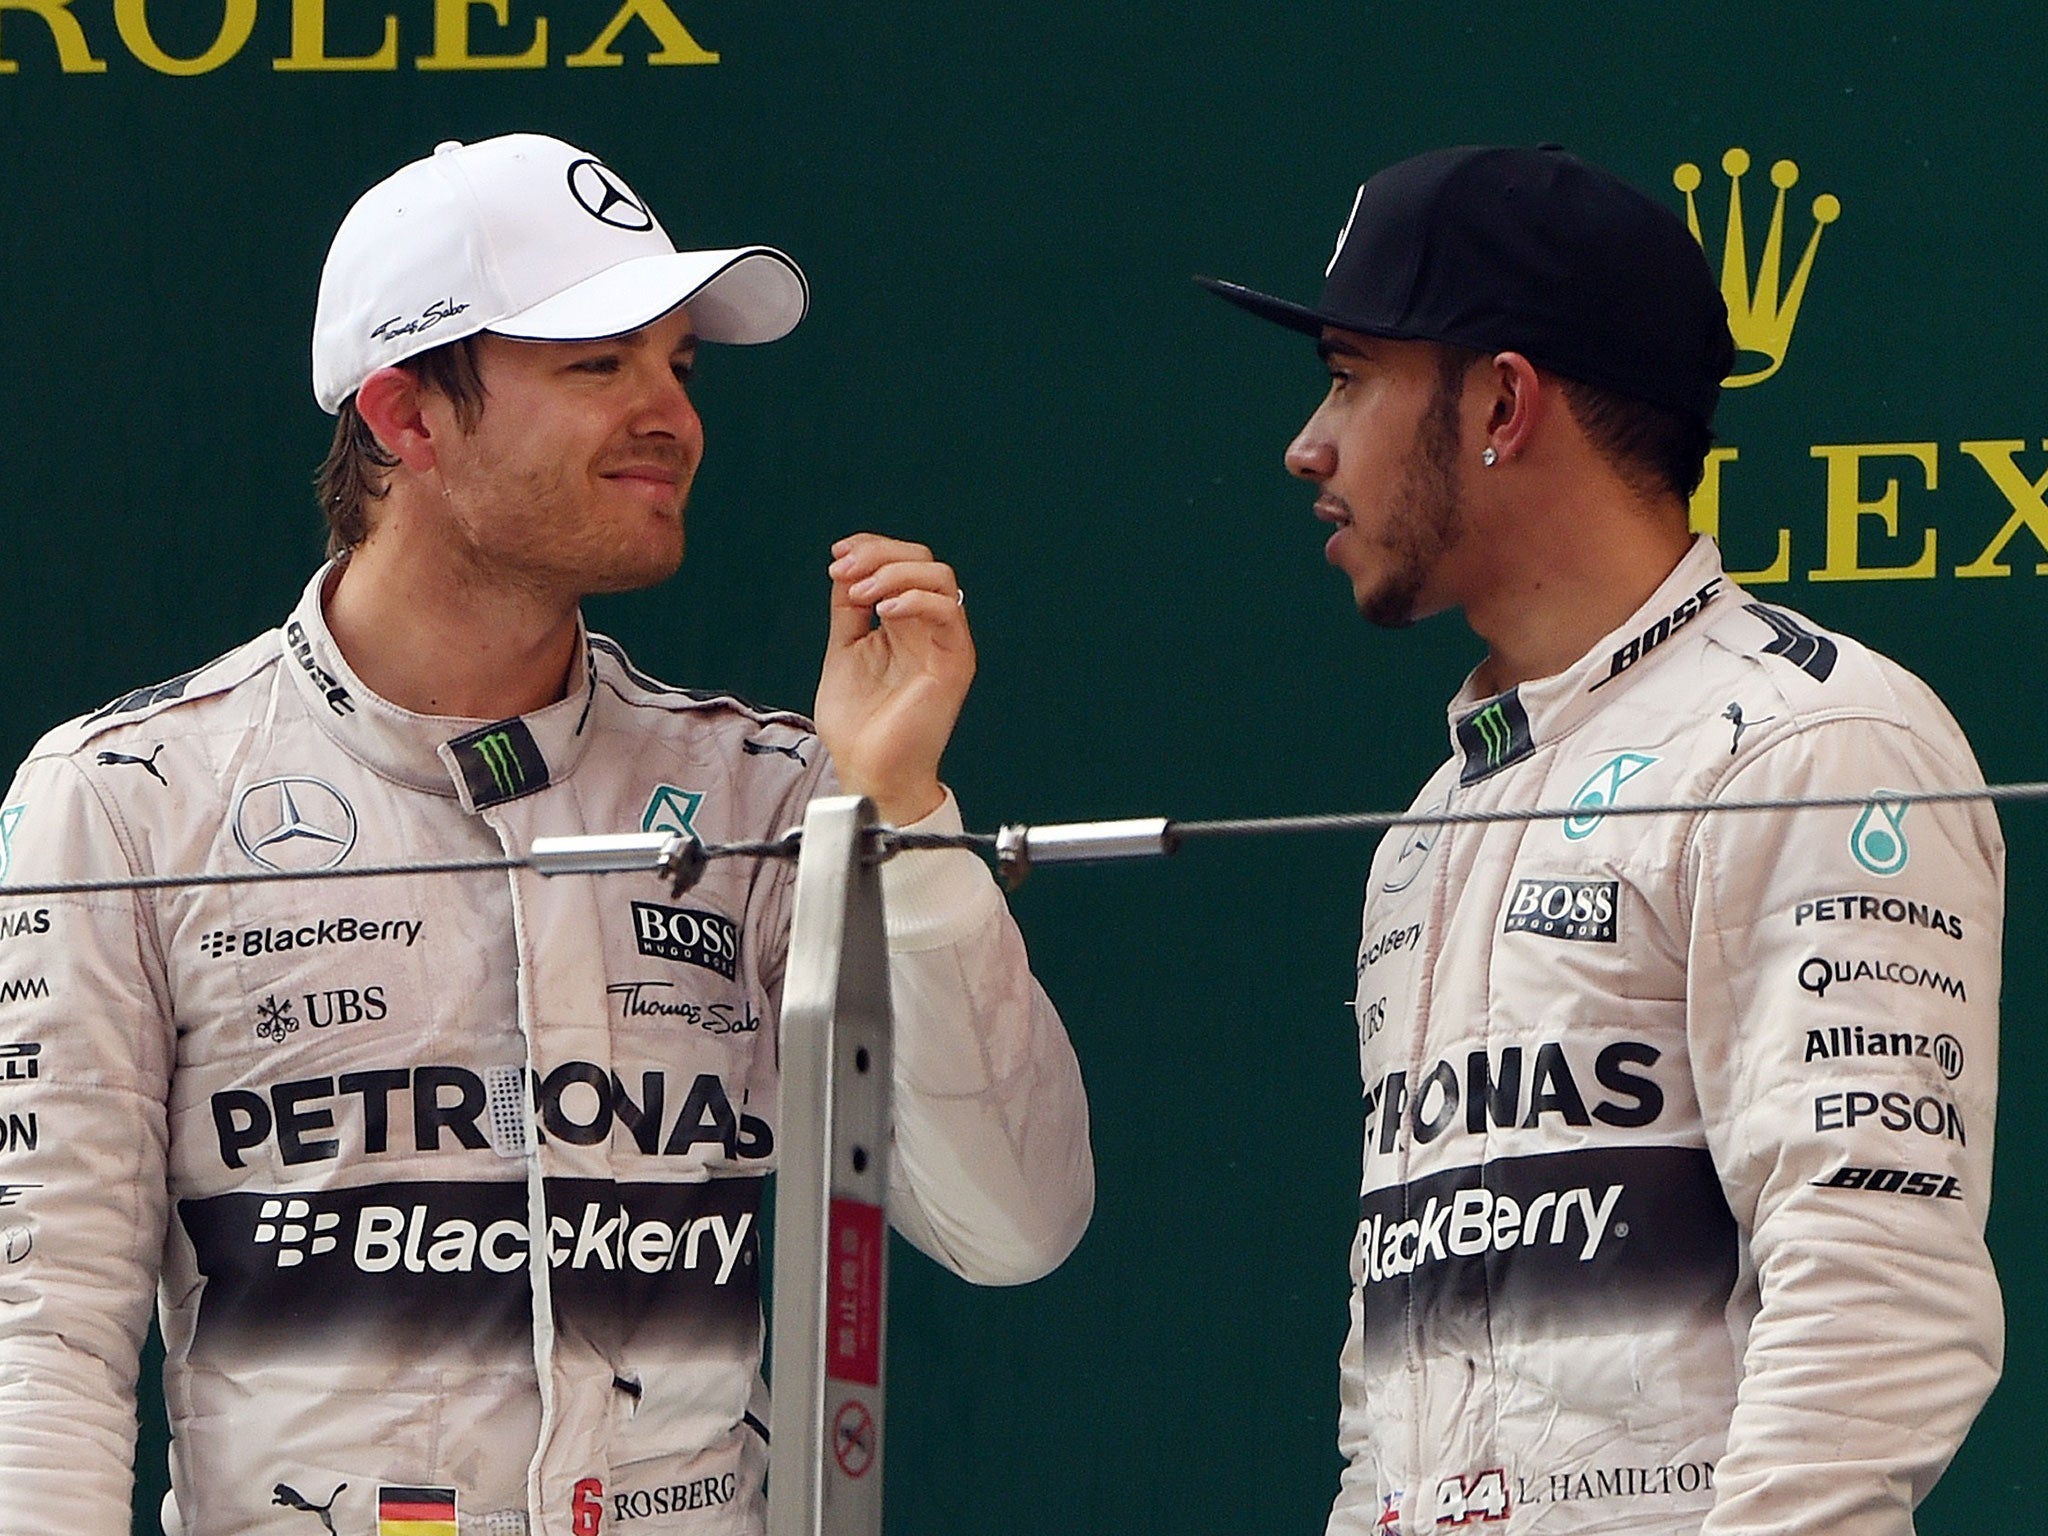 Nico Rosberg and Lewis Hamilton on the podium at the Chinese Grand Prix